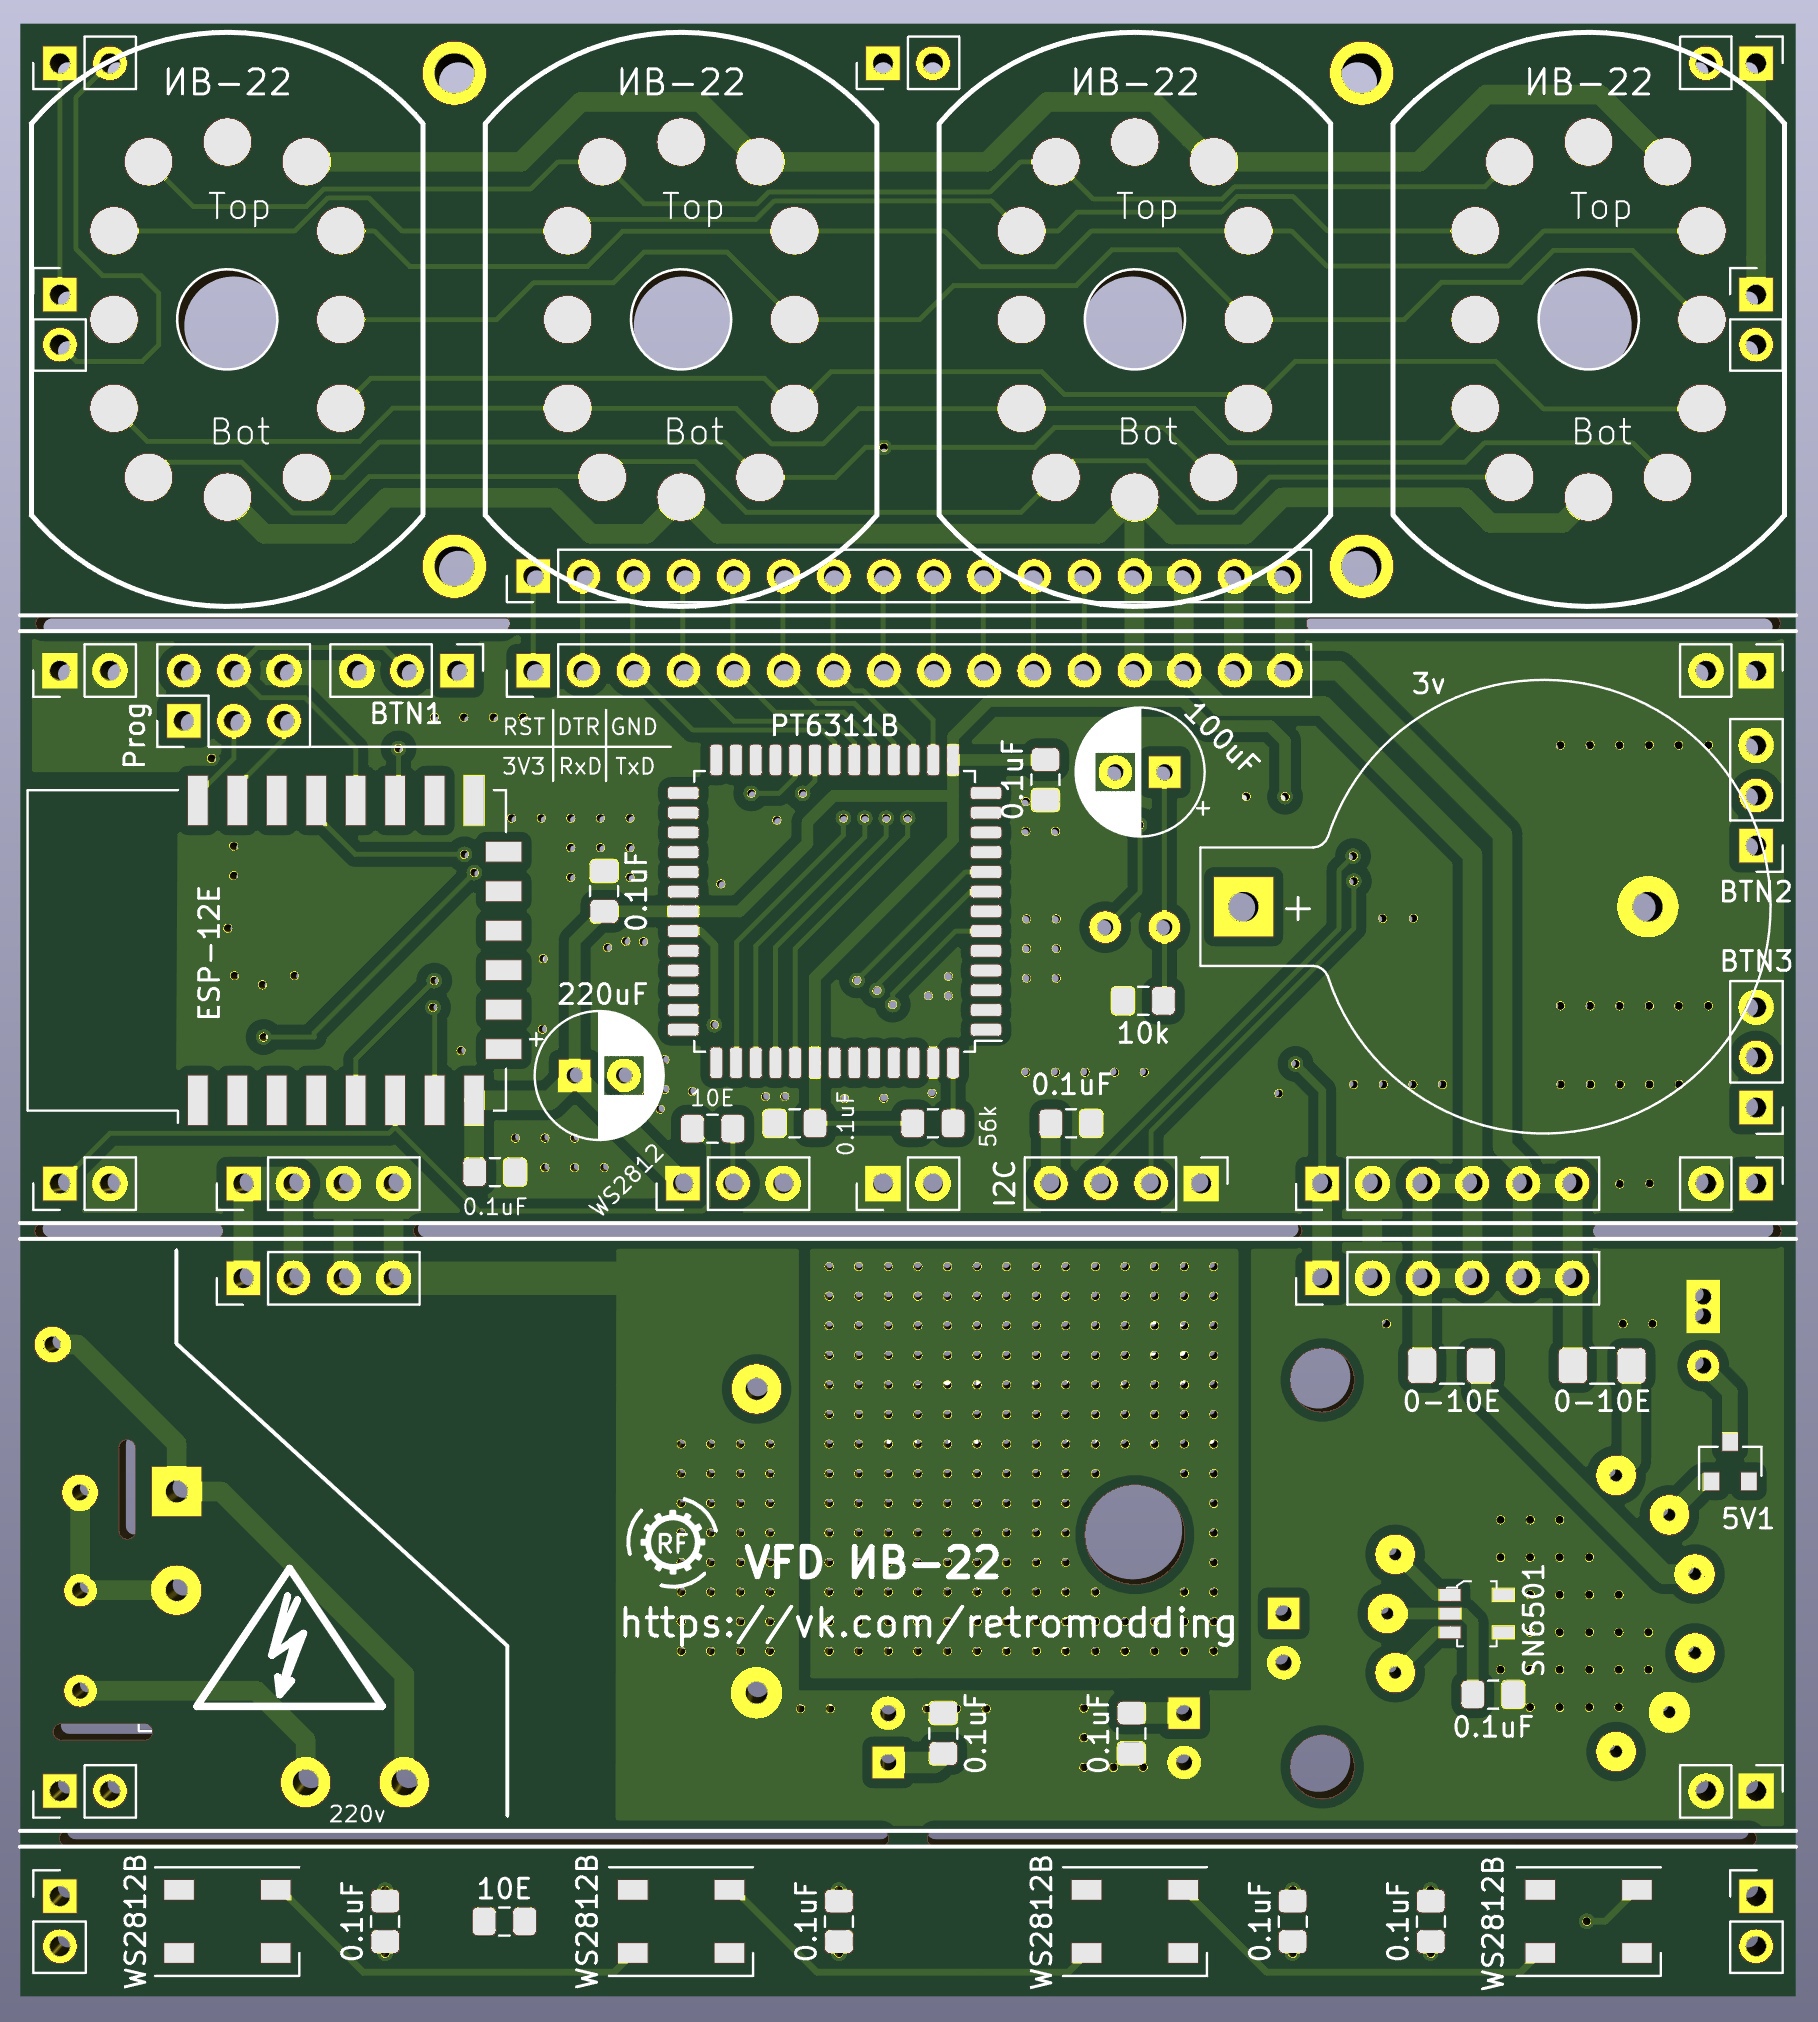 The board for the watch on VFD indicators IV-22 with WiFi